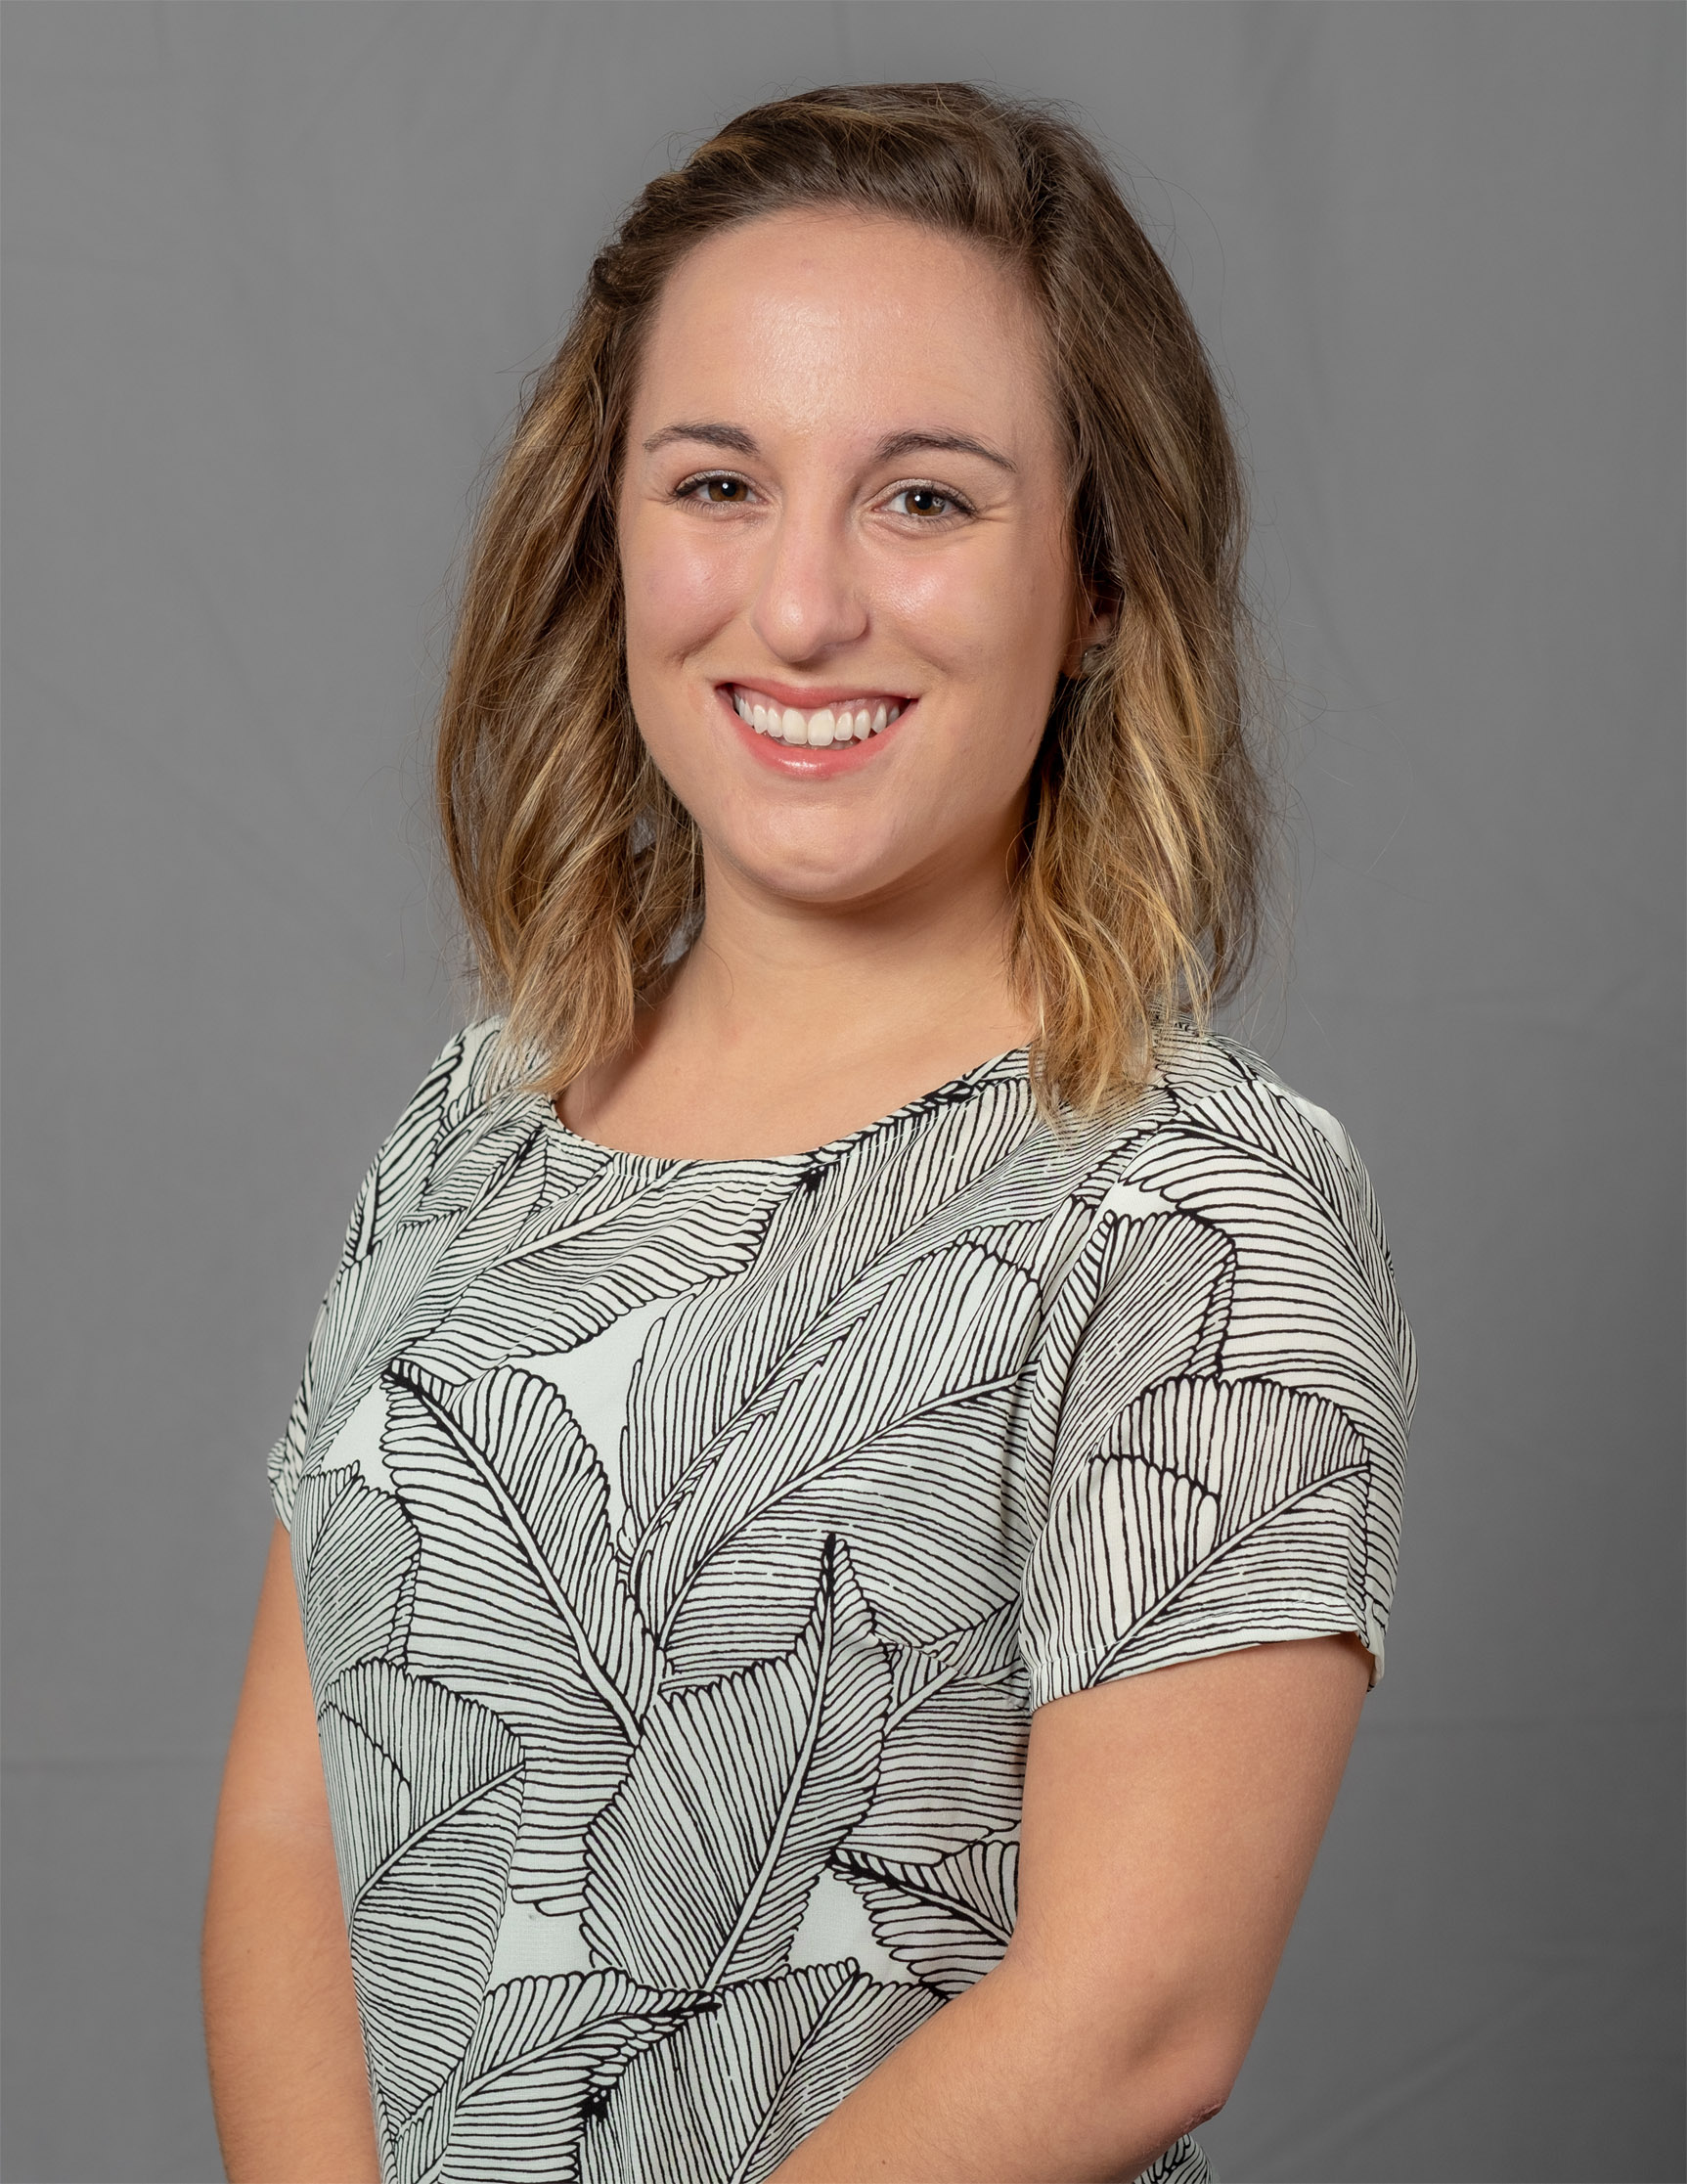 Picture One:
Chelsea Vaal, Graduate of the University of Louisville, Promoted to Senior Designer and Marketing Manager for FUSIONWRX Inc, a Flottman Company.  
